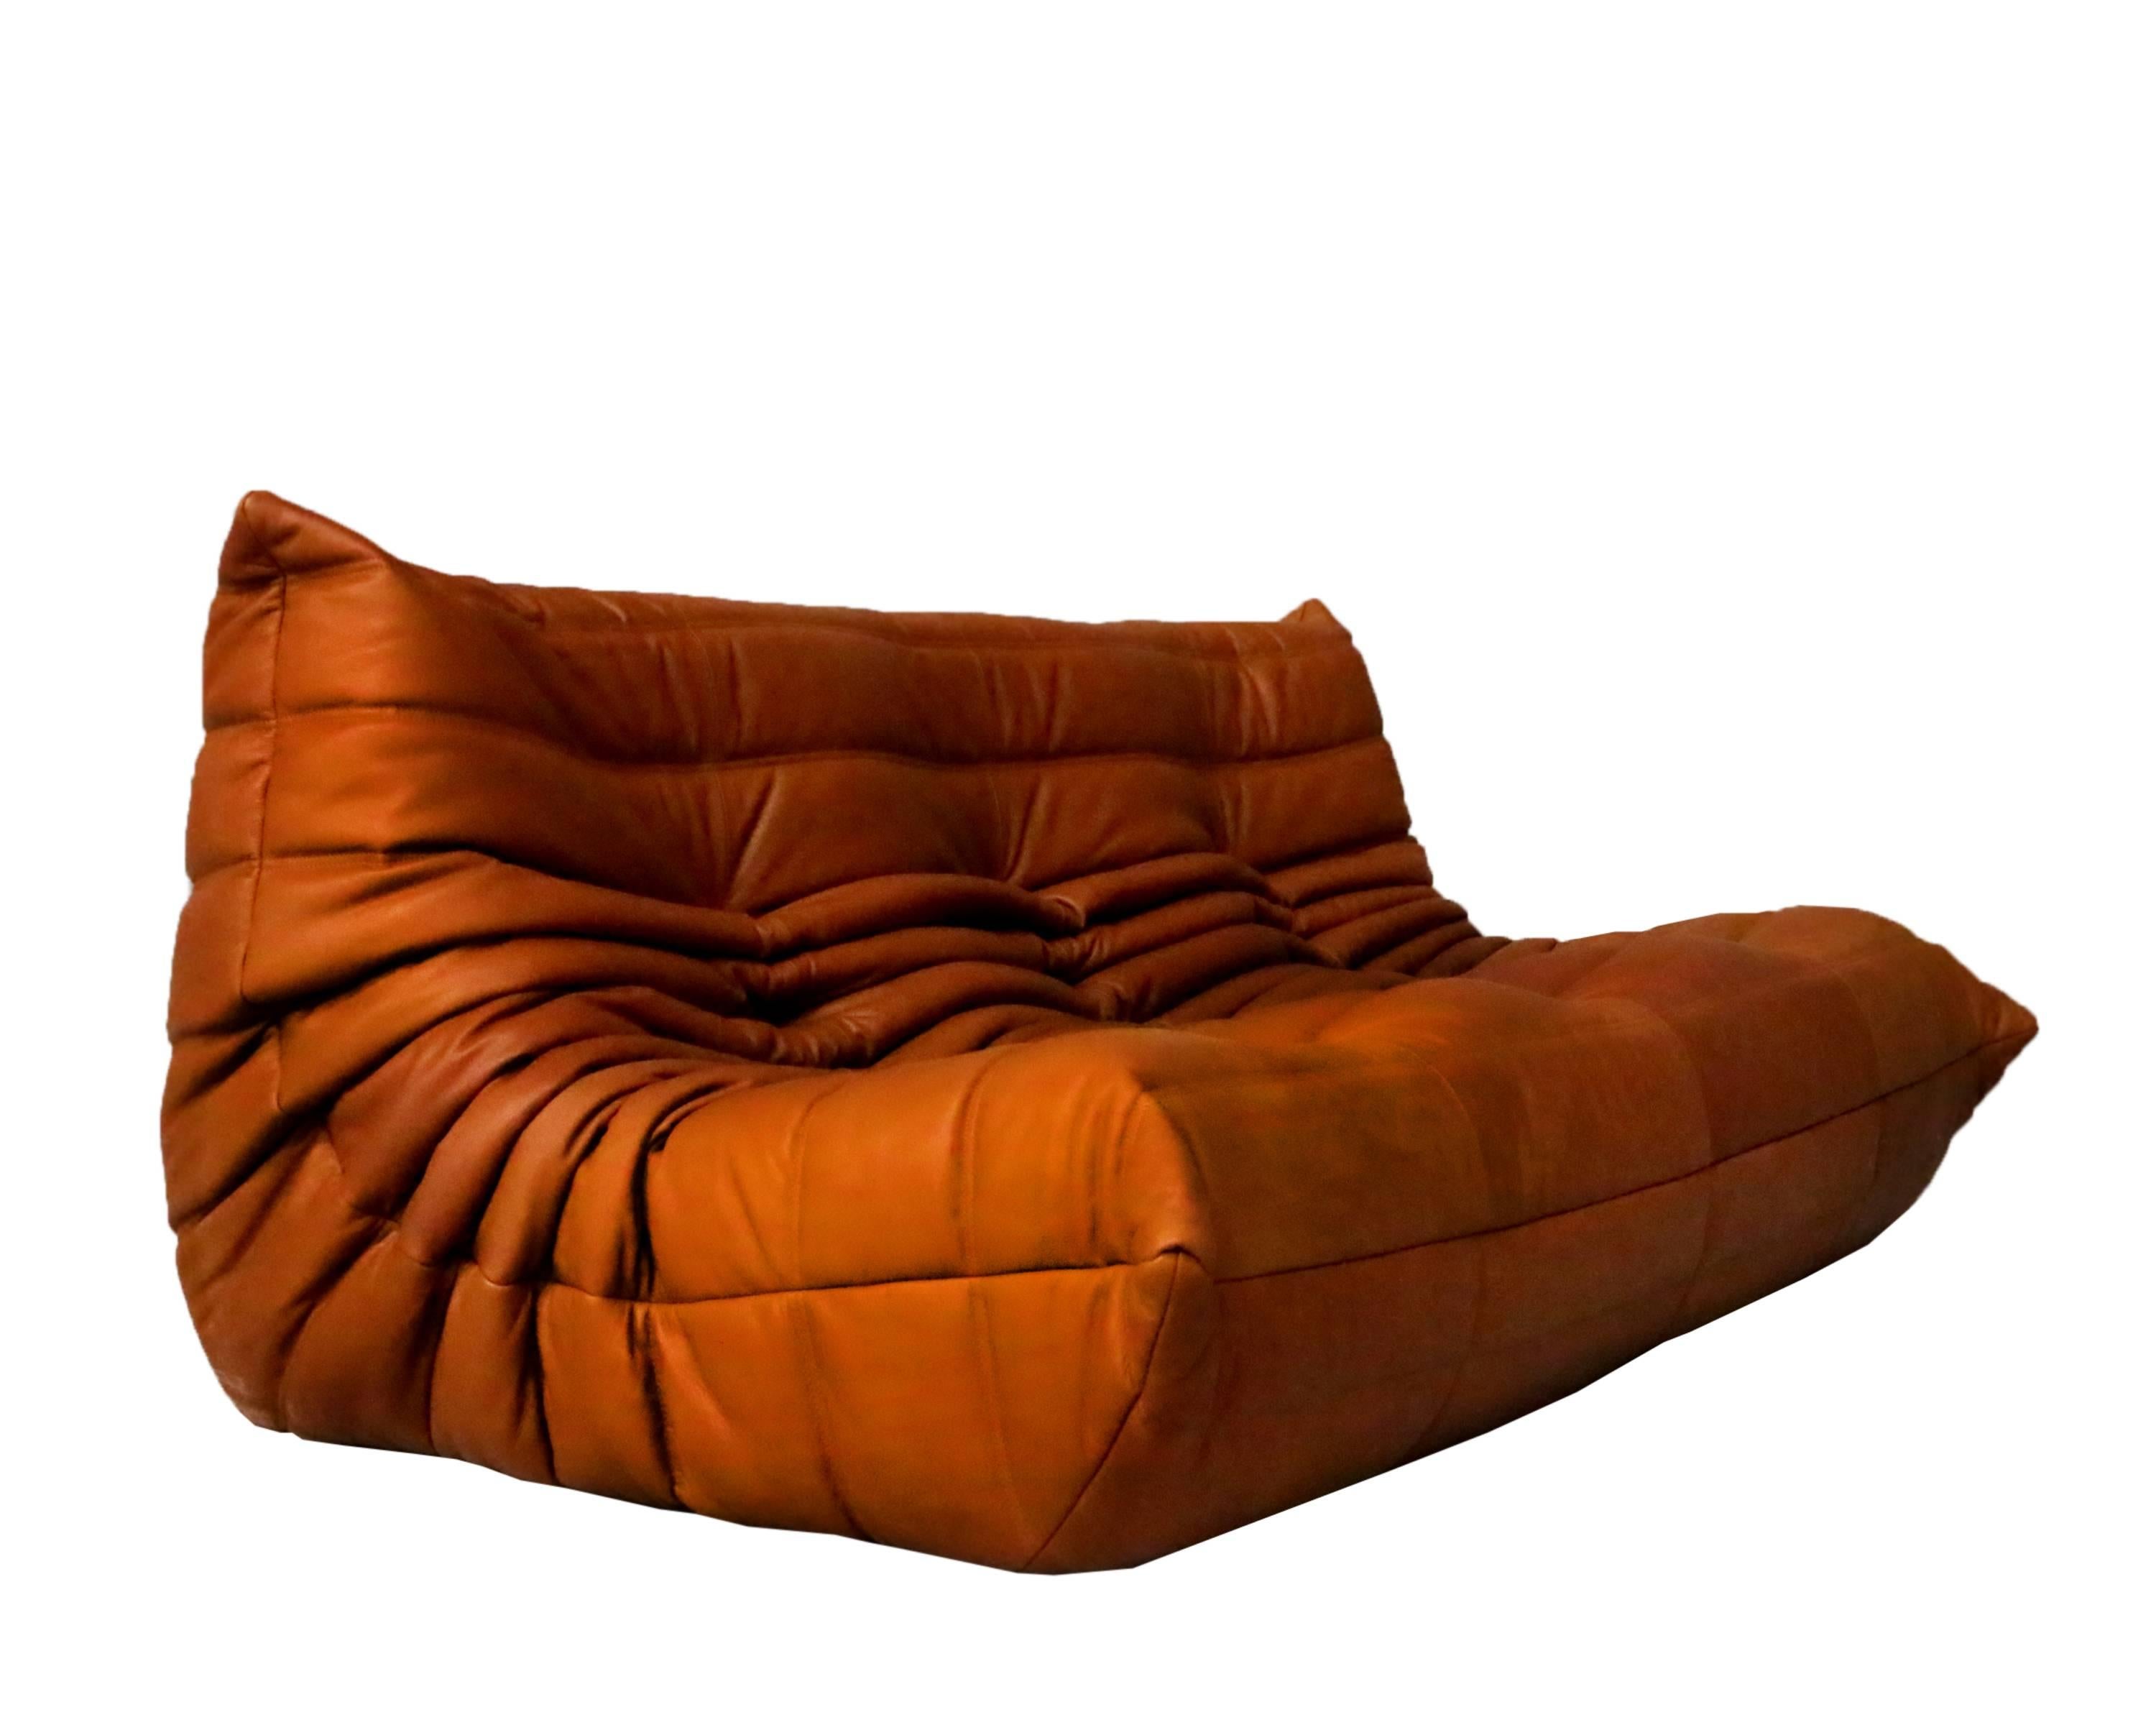 French Vintage Togo Sofa Set in our signature Vegetaly high quality full grain leather